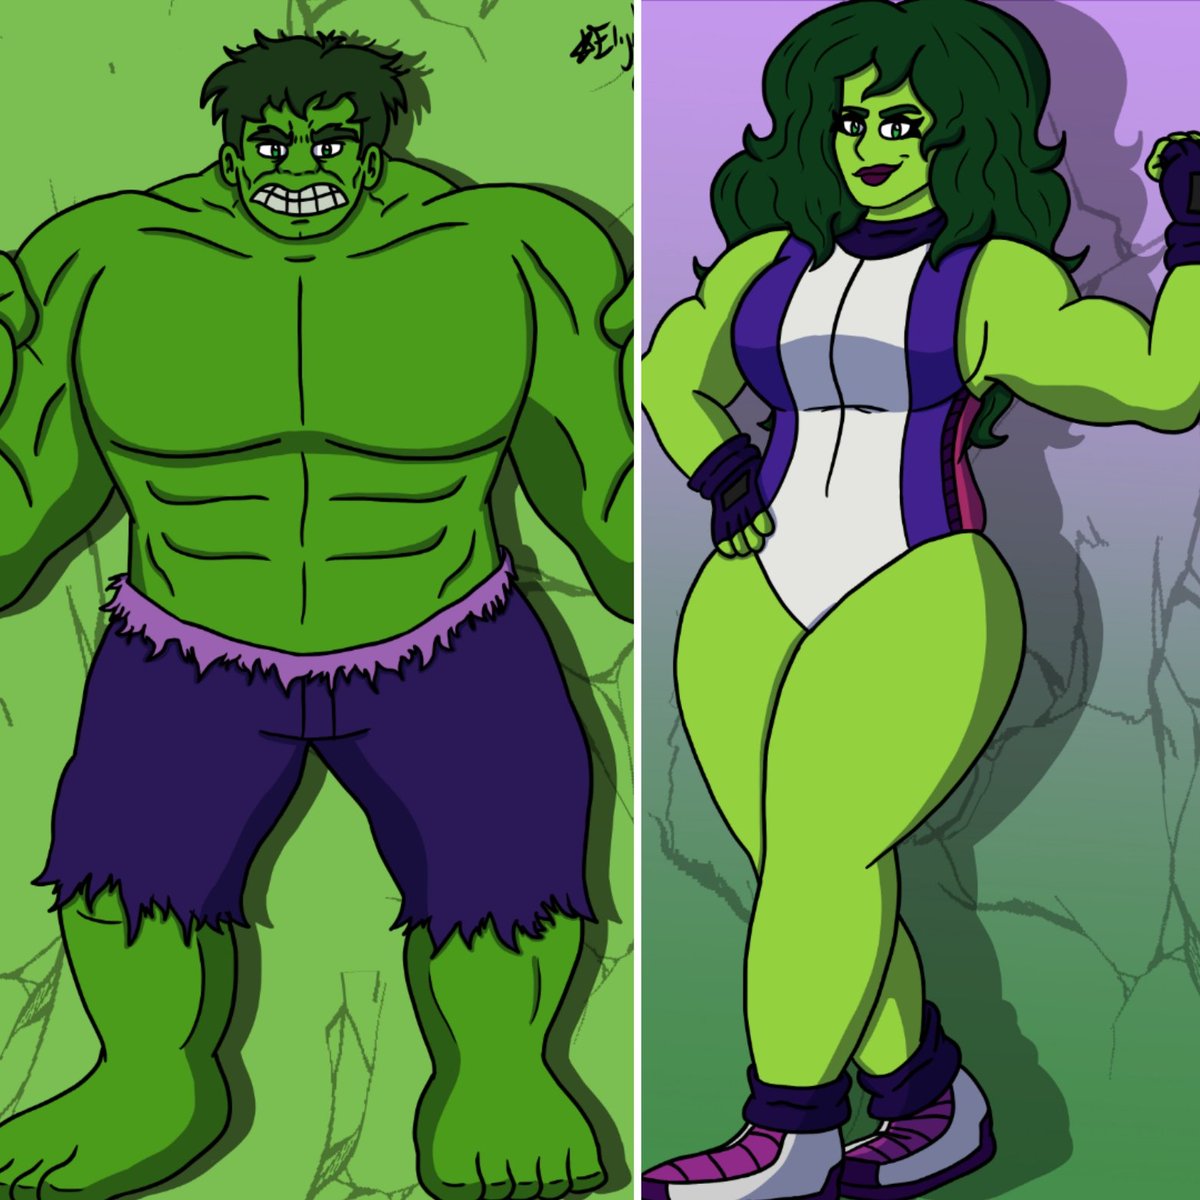 I like the idea of both Hulk and She-Hulk having different shades of green. I think it makes them both stand out from another, but I like to think it could also reflect on who has more control of themselves.